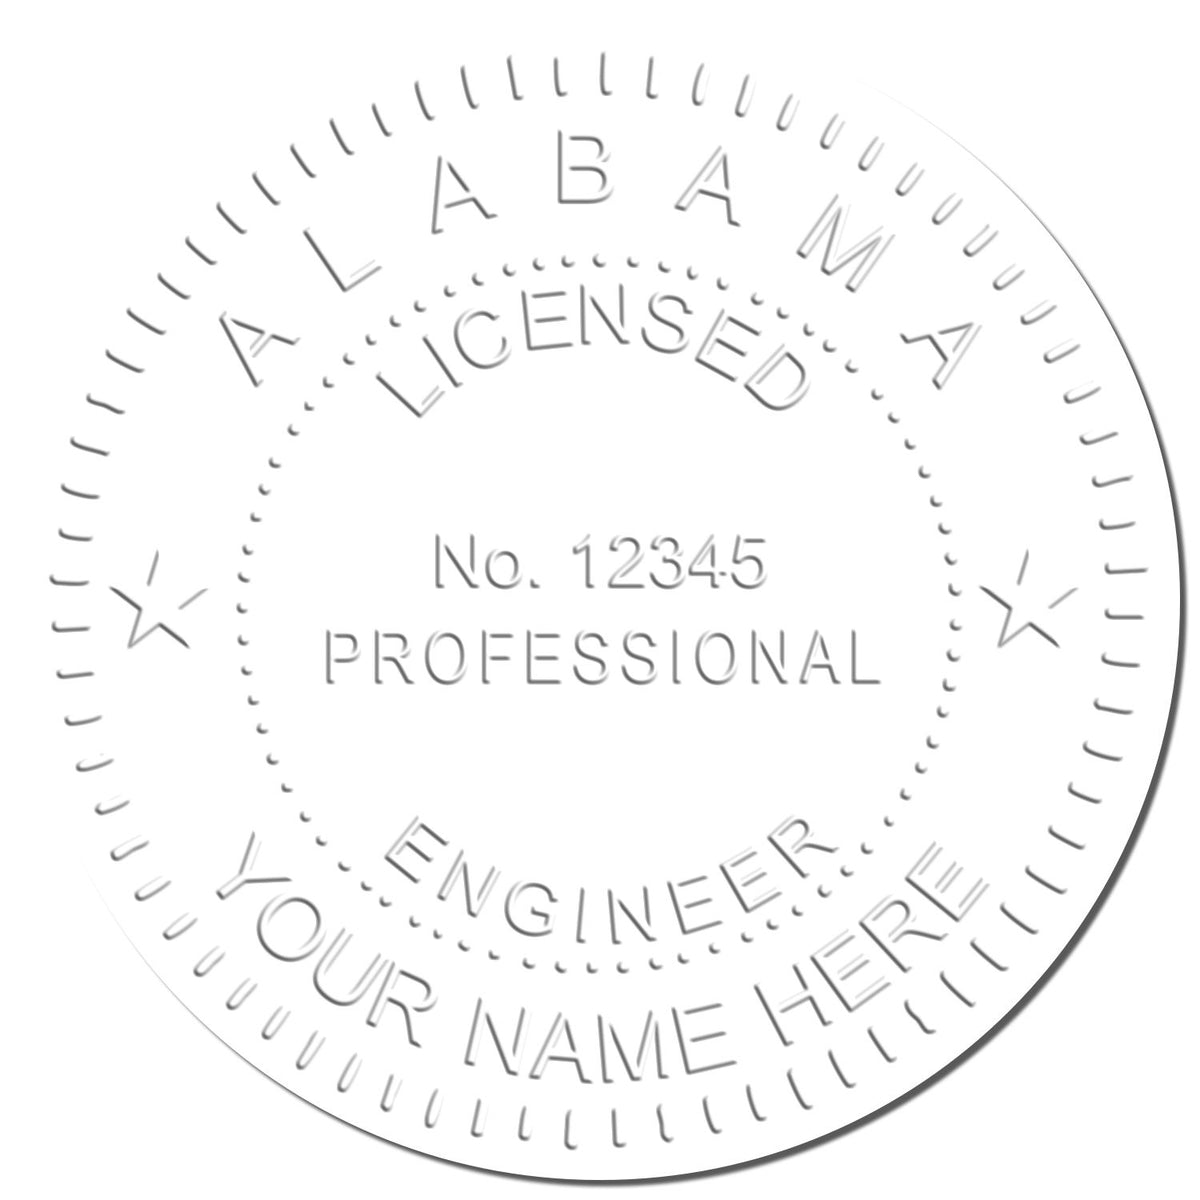 A photograph of the Handheld Alabama Professional Engineer Embosser stamp impression reveals a vivid, professional image of the on paper.